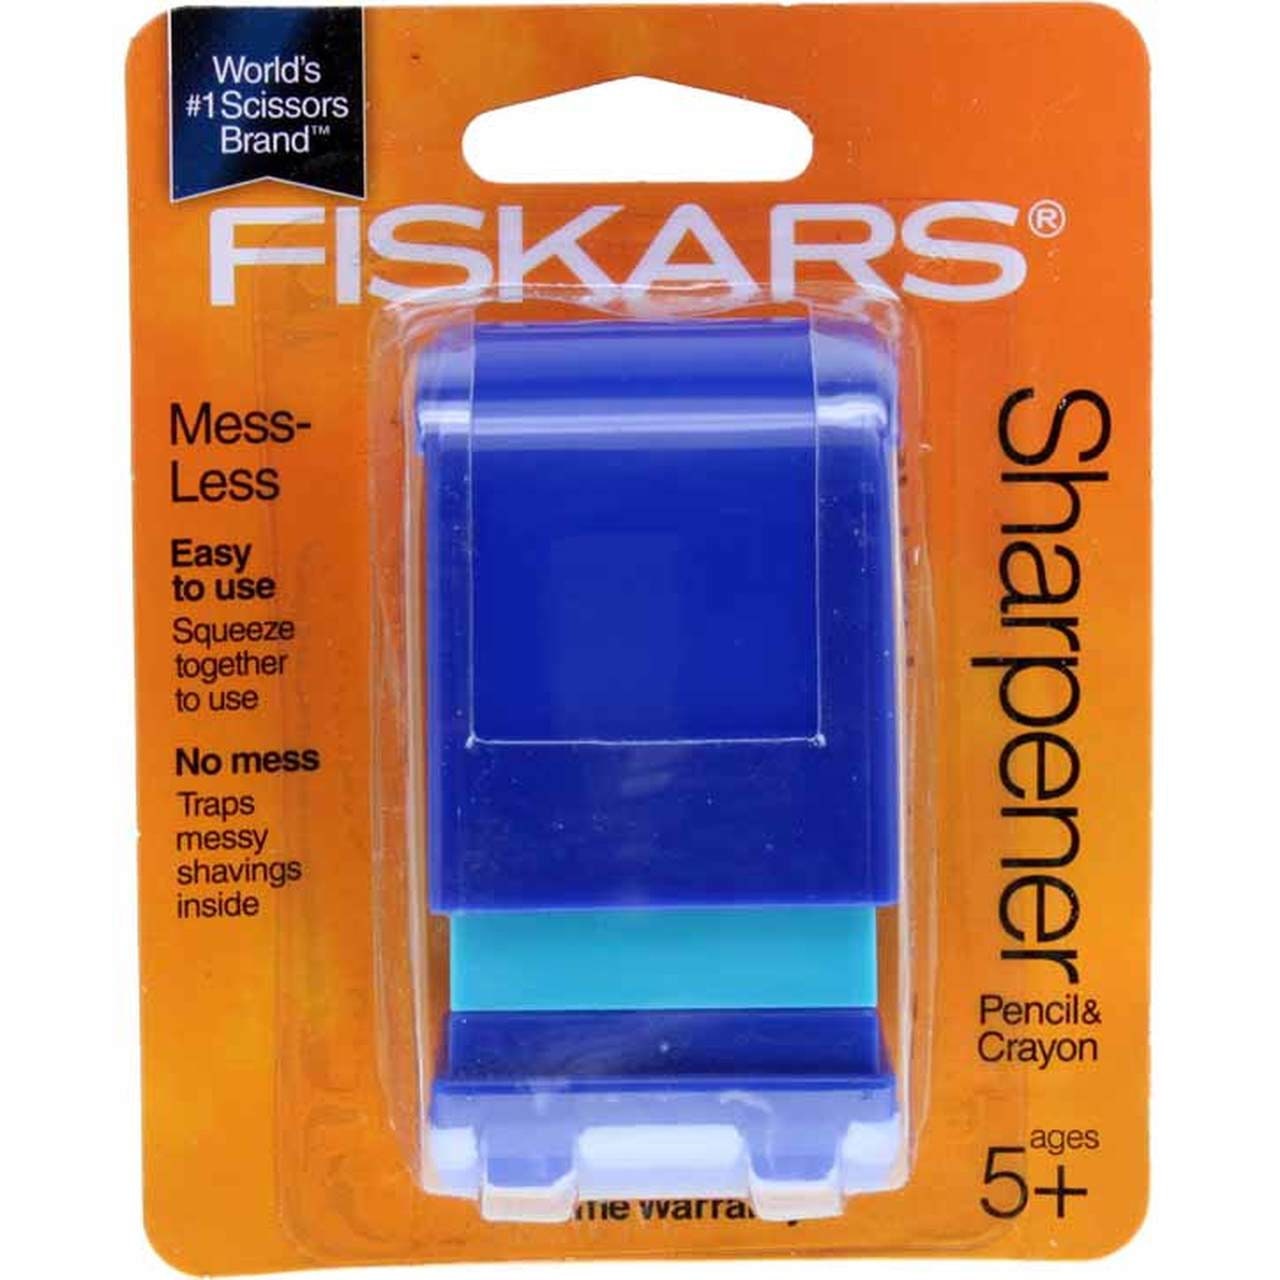 Is this sharpener any good? I was given it with two fiskars axes for  christmas. I dont need my tools crazy sharp but i dont want them dull and  mainly dont want